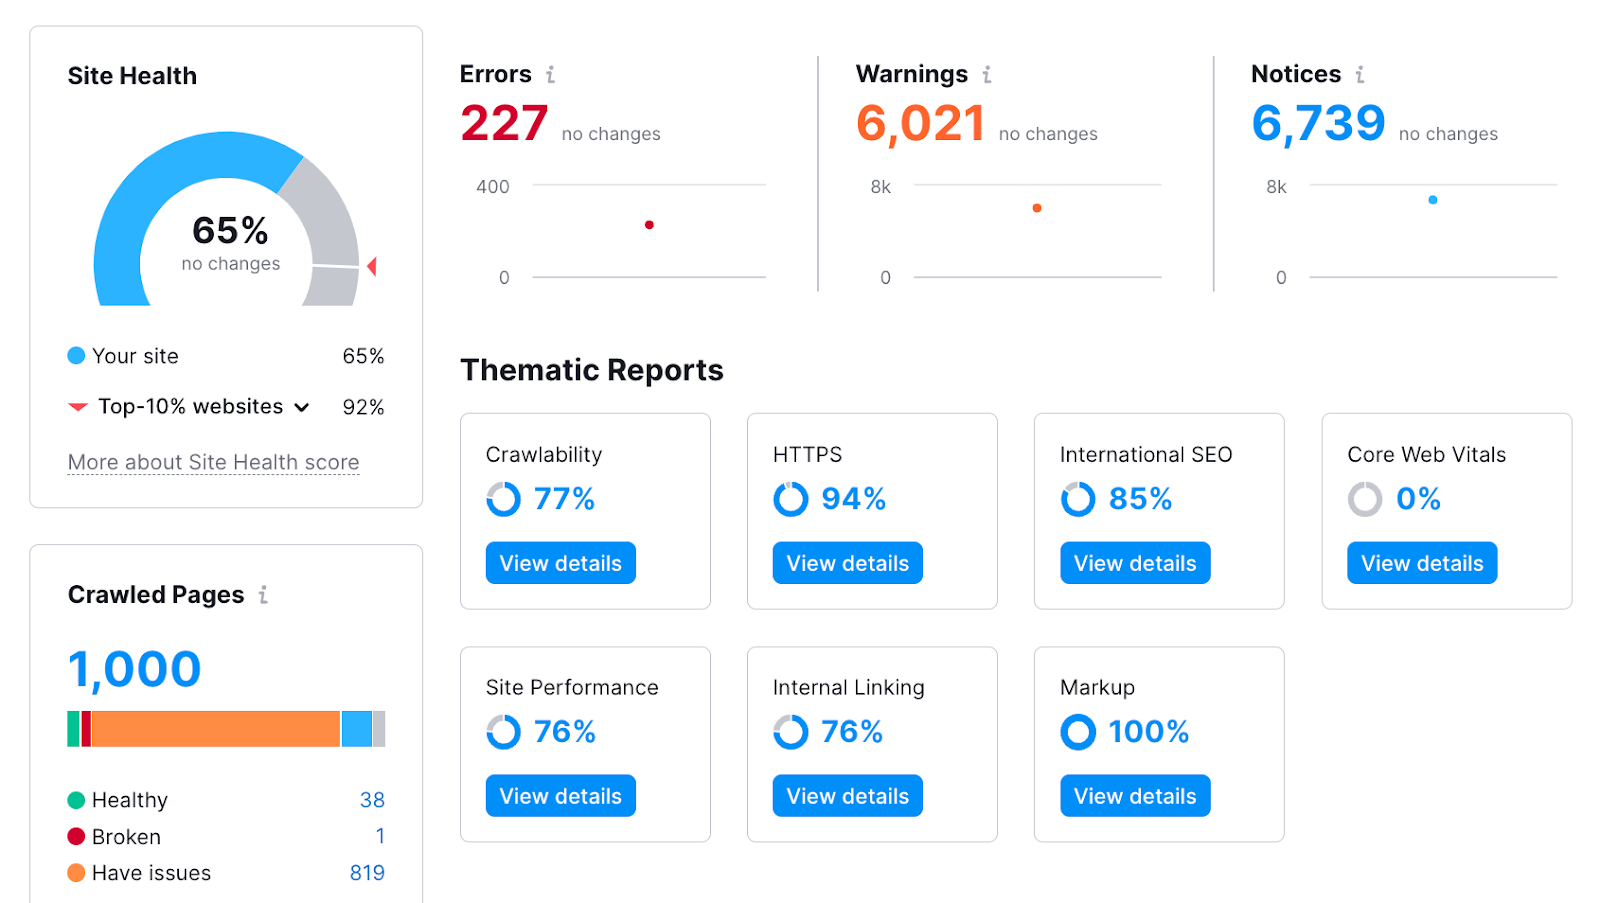 Site Audit overview dashboard, showing site health, errors, warnings, notices, crawled pages, and other site metrics